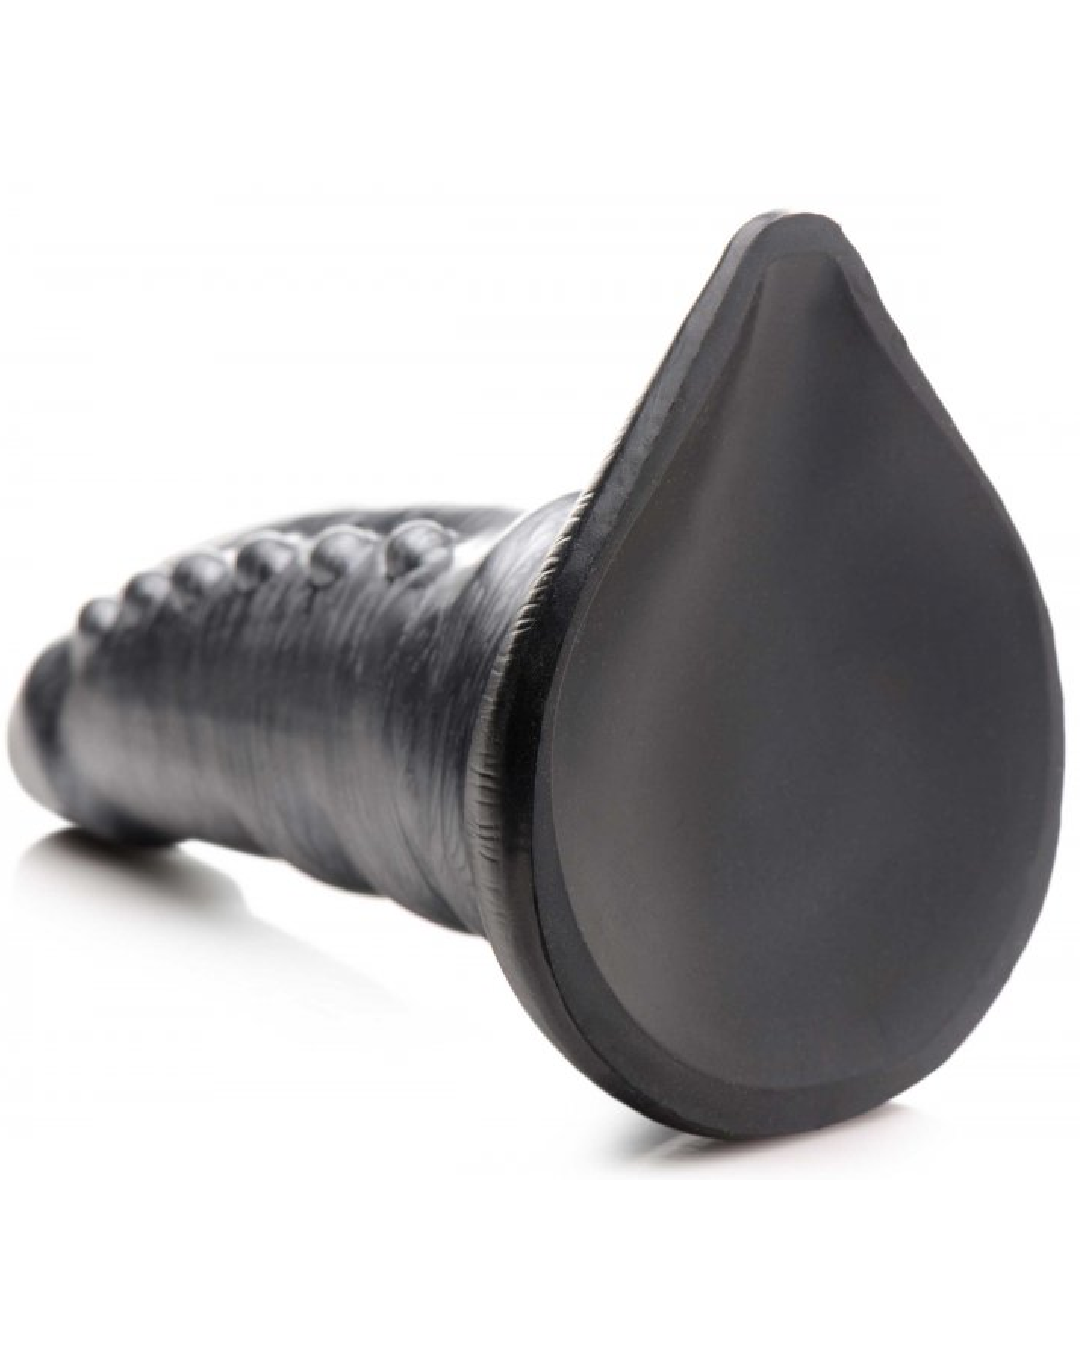 Creature Cocks Beastly Tapered Bumpy Silicone Tentacle Dildo view of suction cup base